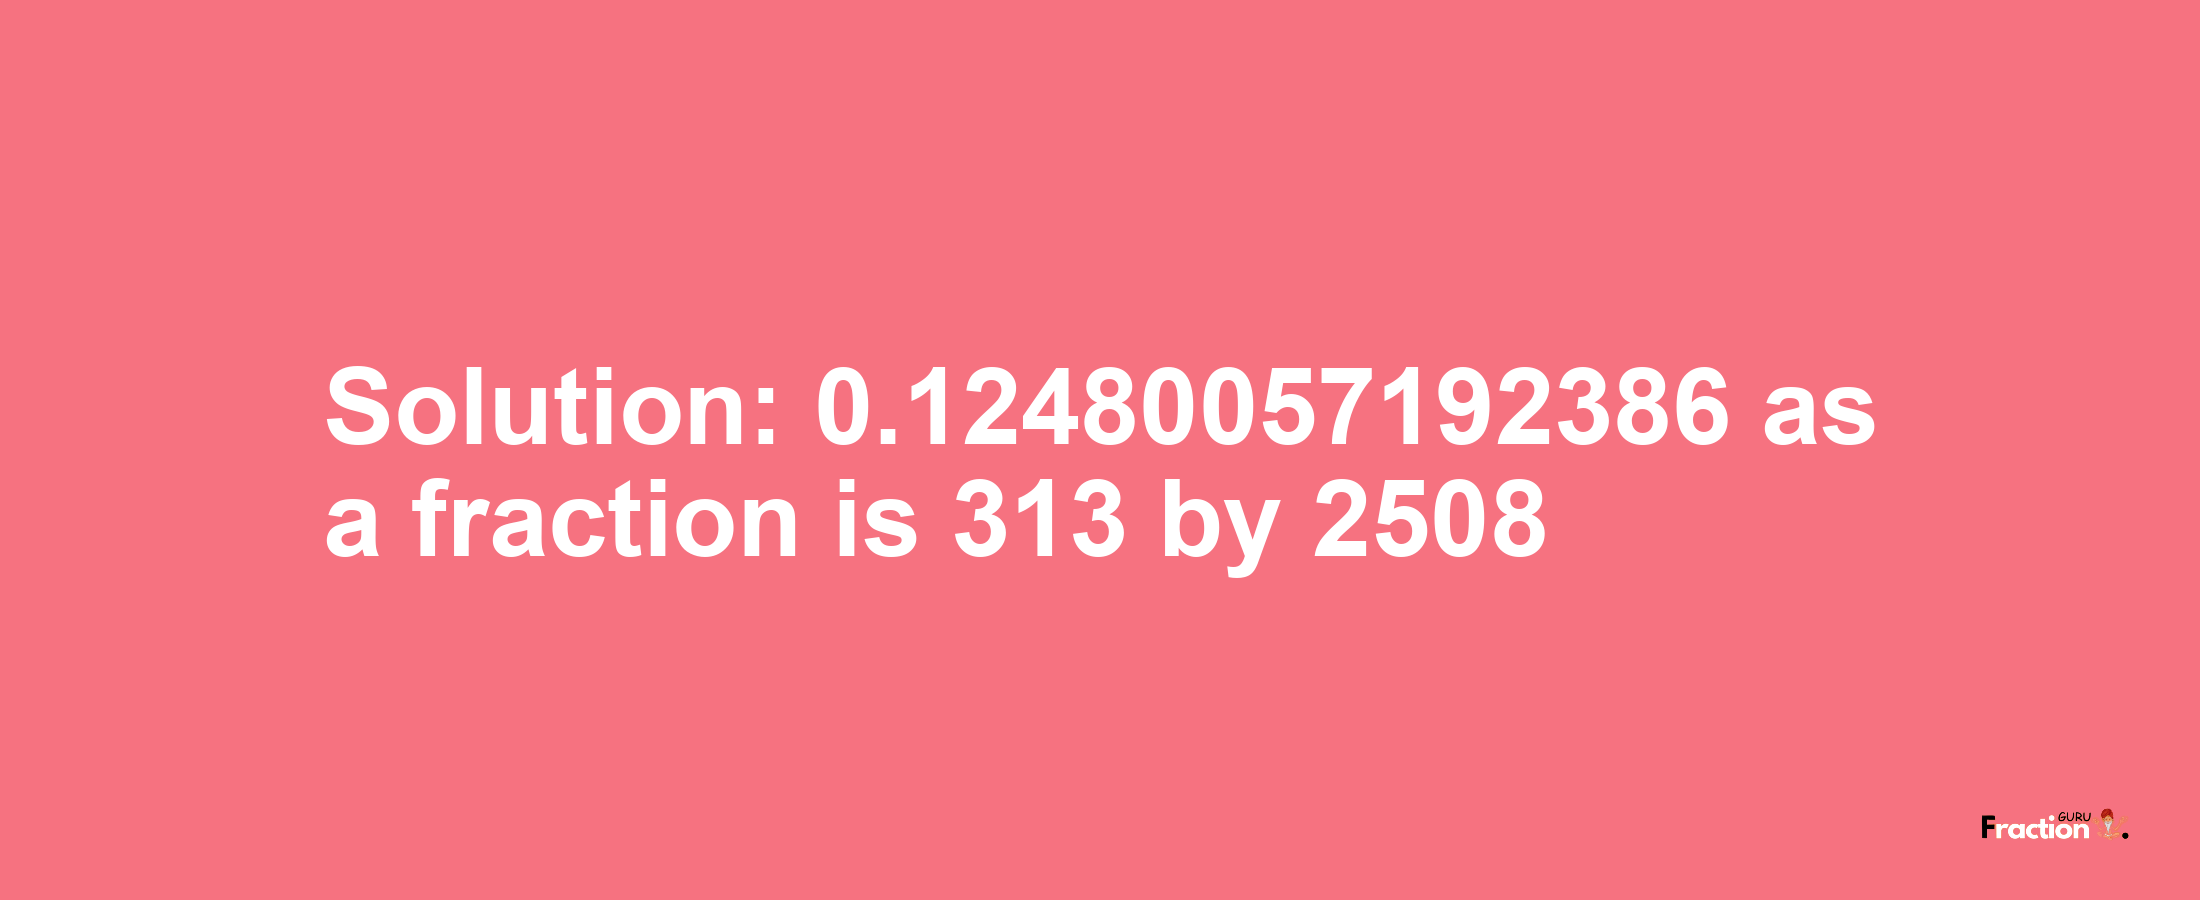 Solution:0.12480057192386 as a fraction is 313/2508